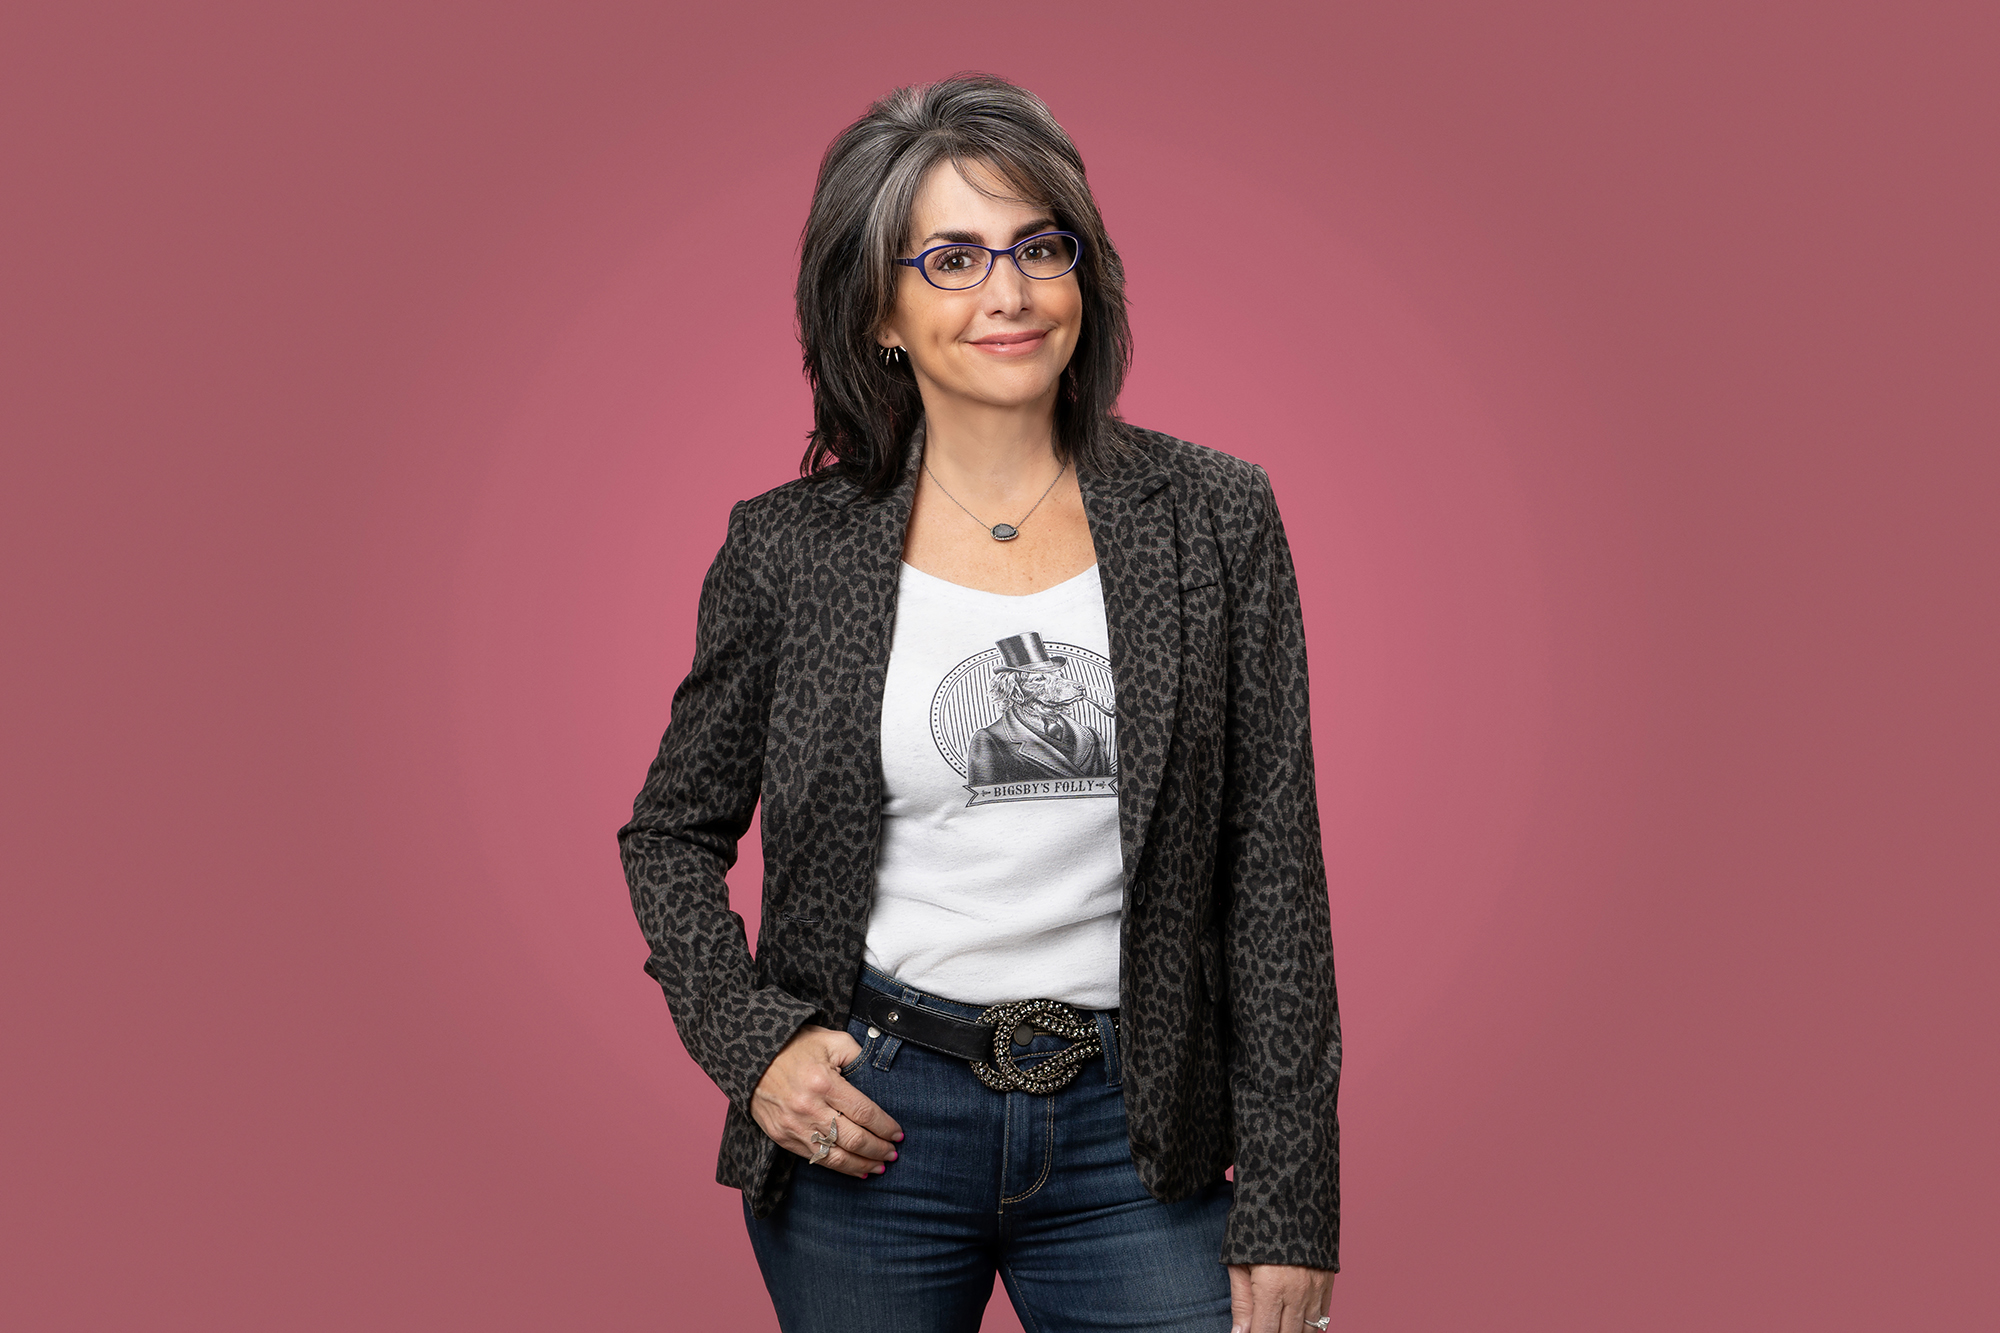 A woman in jeans and a t-shirt striking a pose against a vibrant pink background.